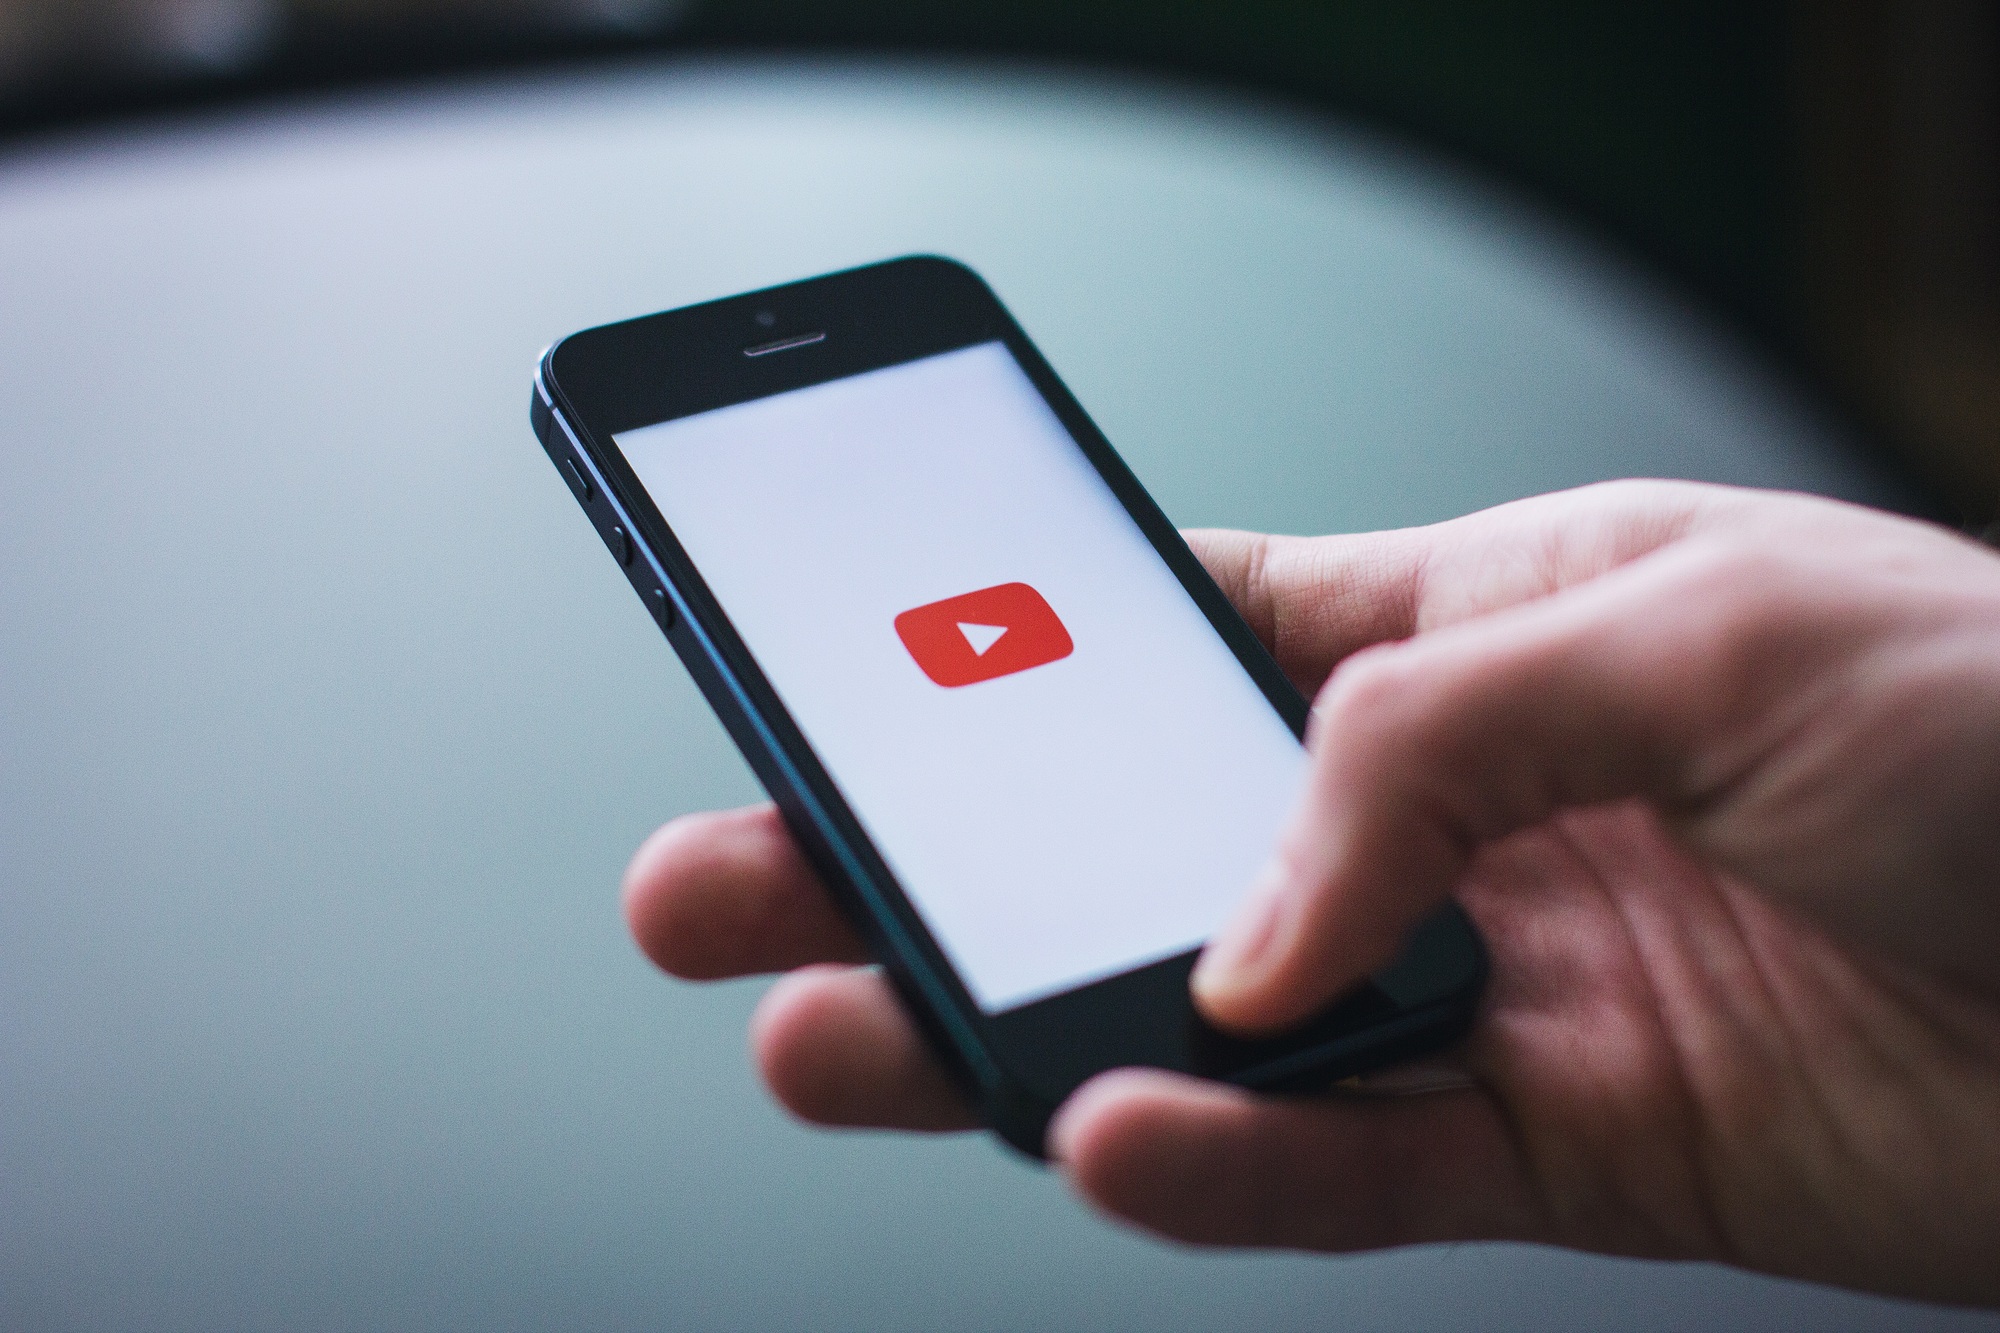 Trying to advertise your business online? YouTube ads might be the answer you've been looking for. Click here to learn how to advertise on YouTube.